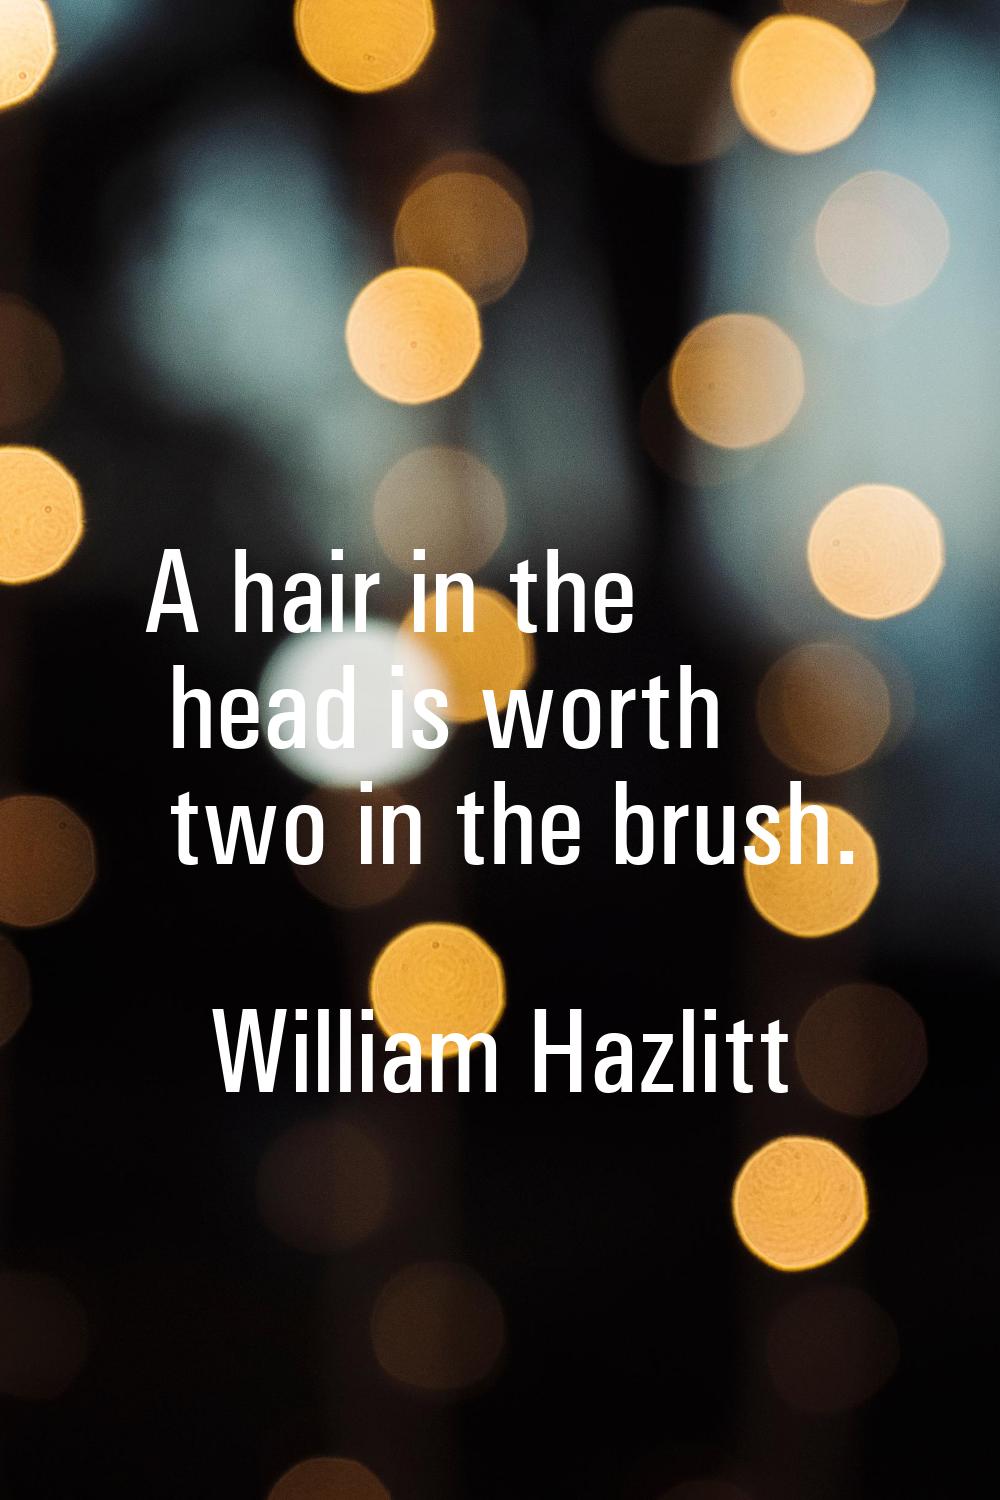 A hair in the head is worth two in the brush.